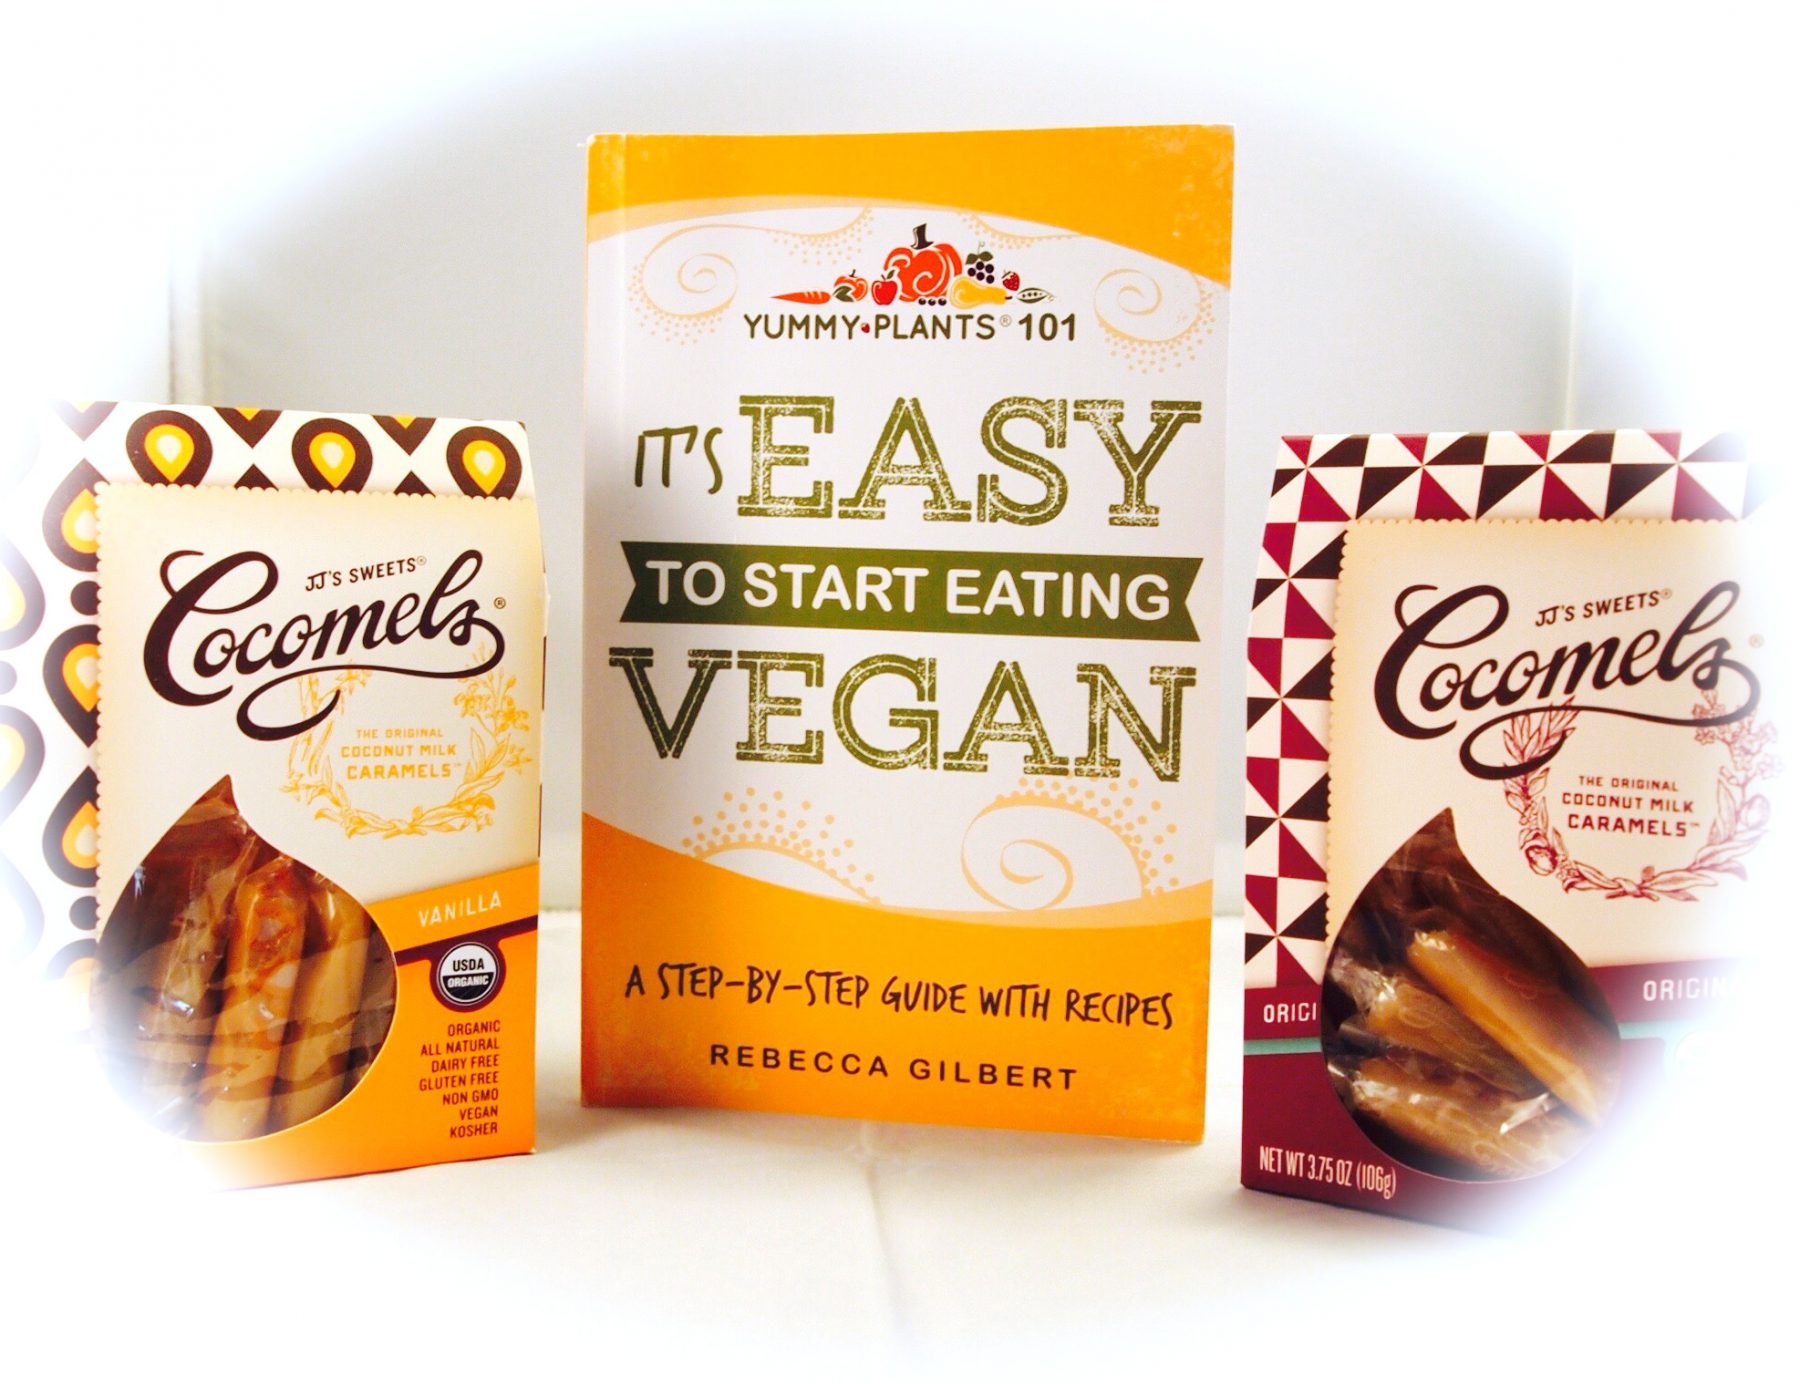 Win JJ’s Cocomels and It’s Easy to Start Eating Vegan!